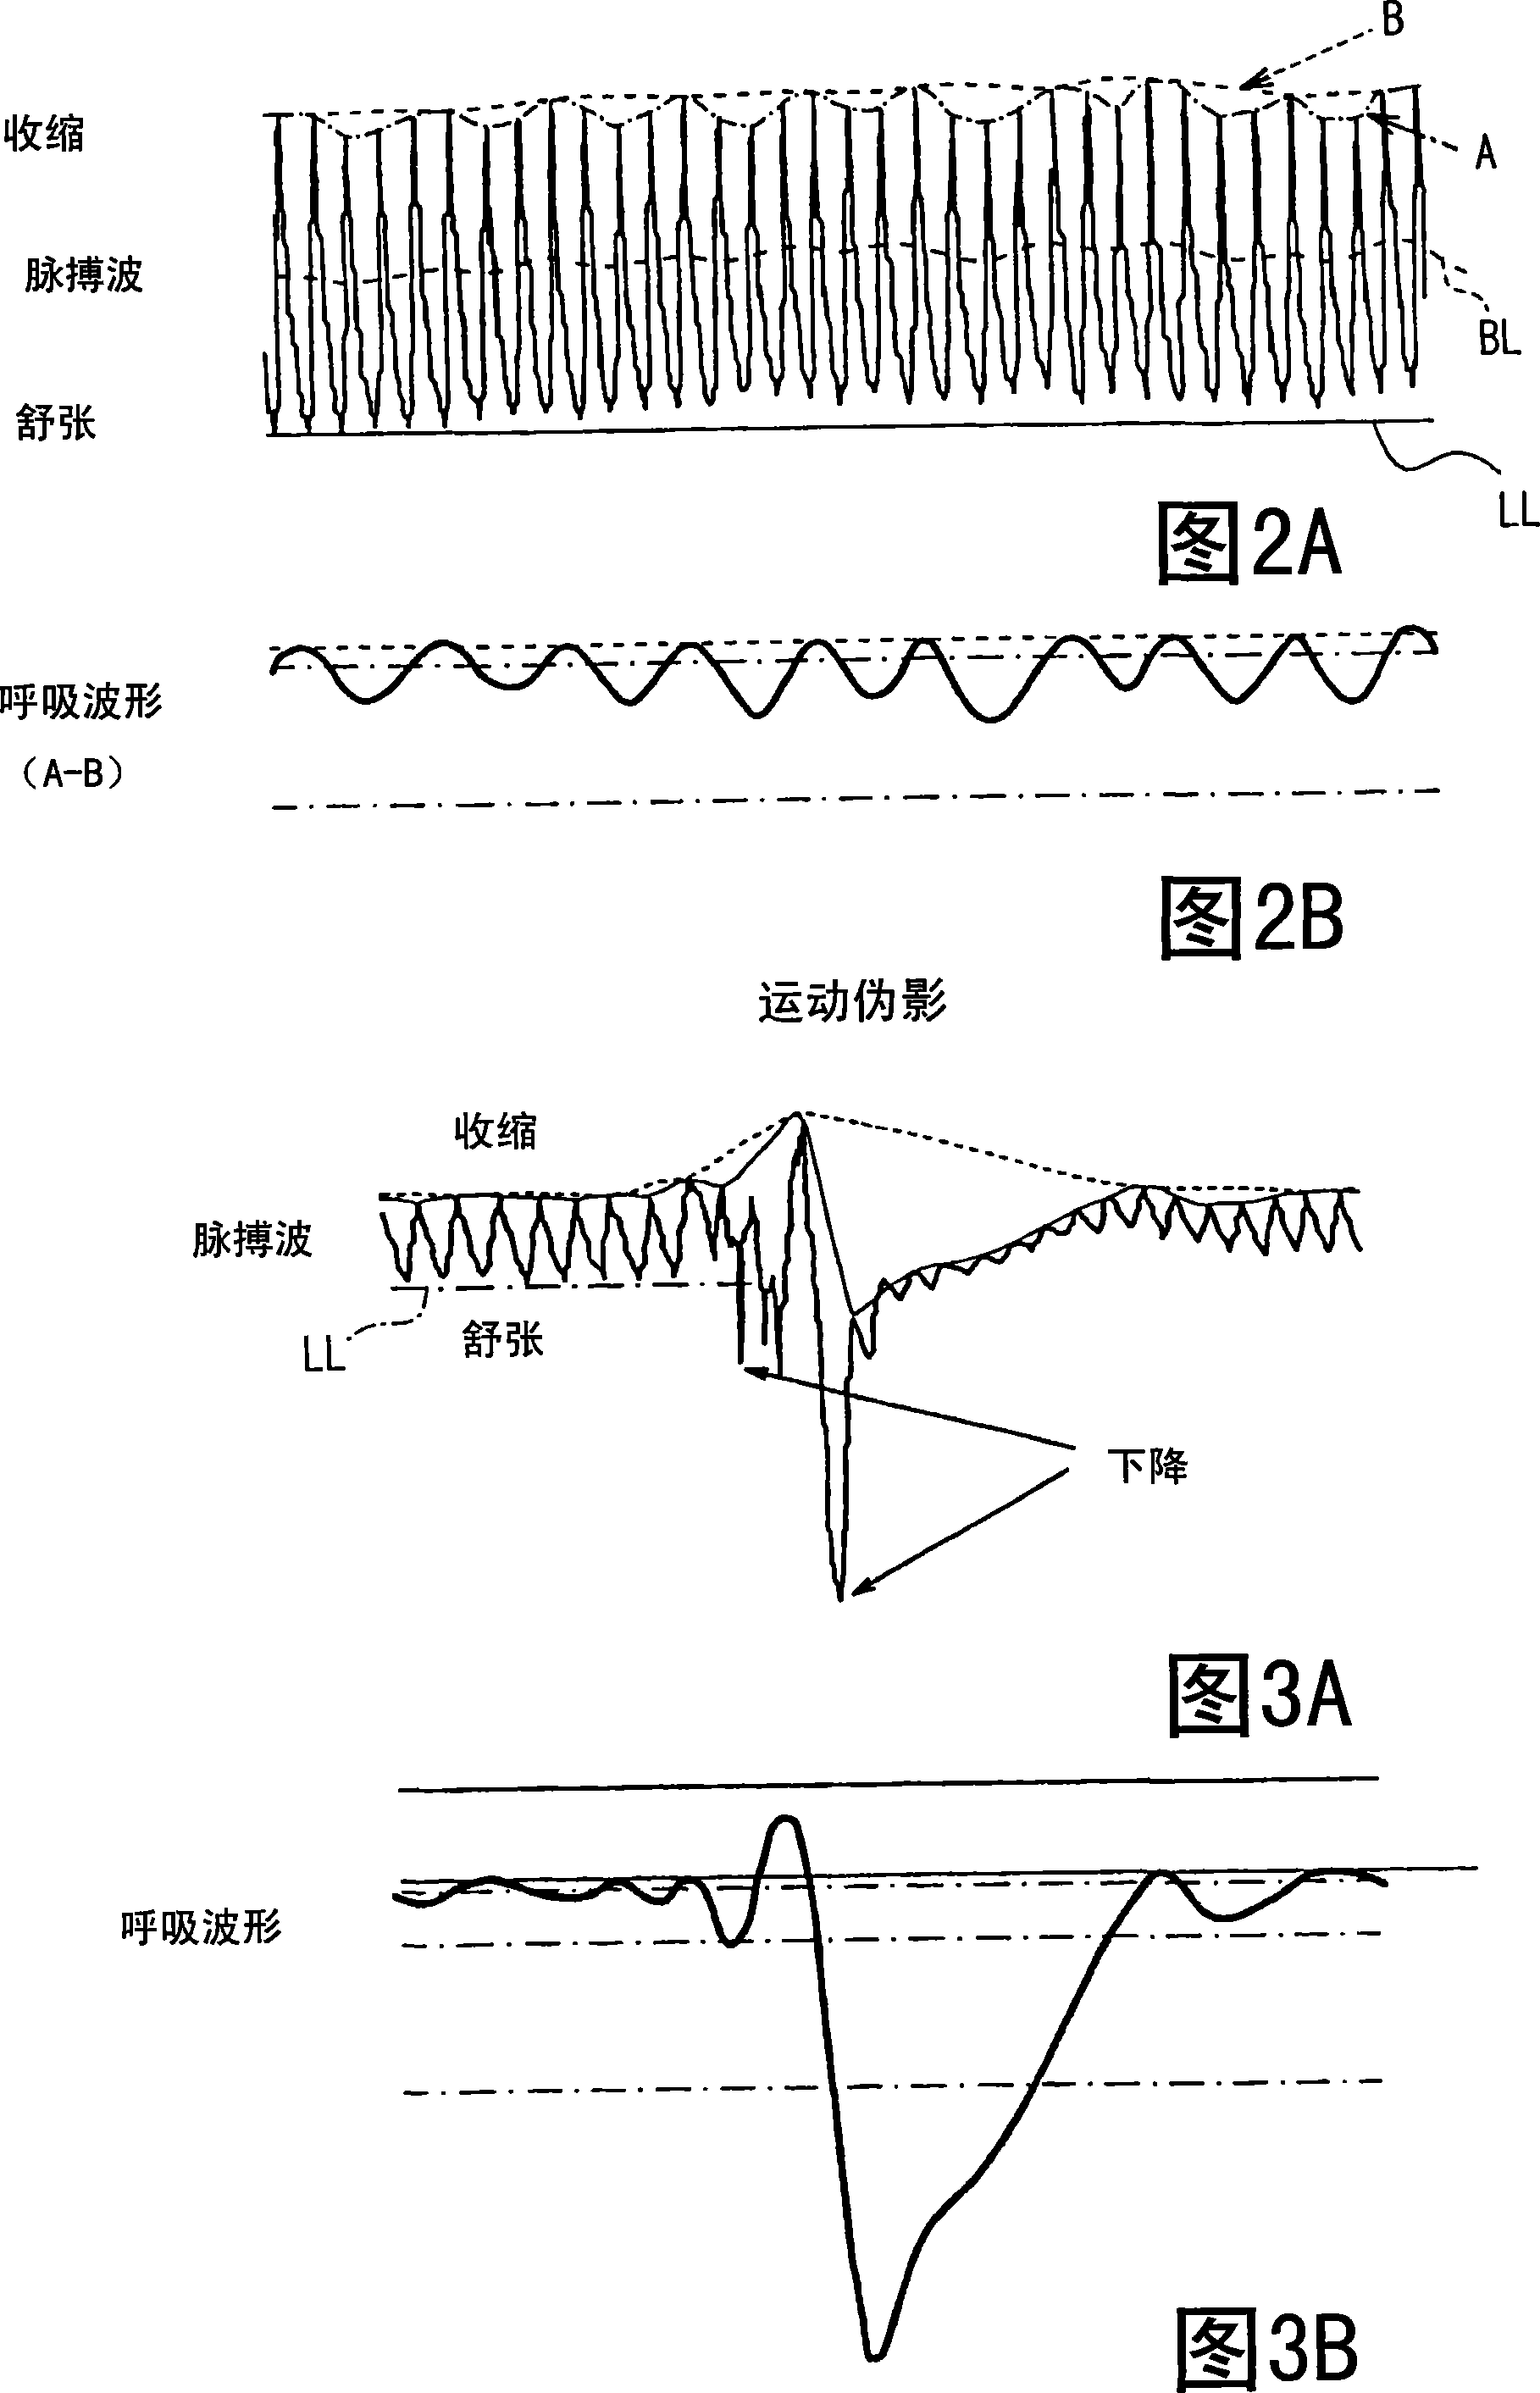 Apparatus for detecting vital functions, control unit and pulse wave sensor